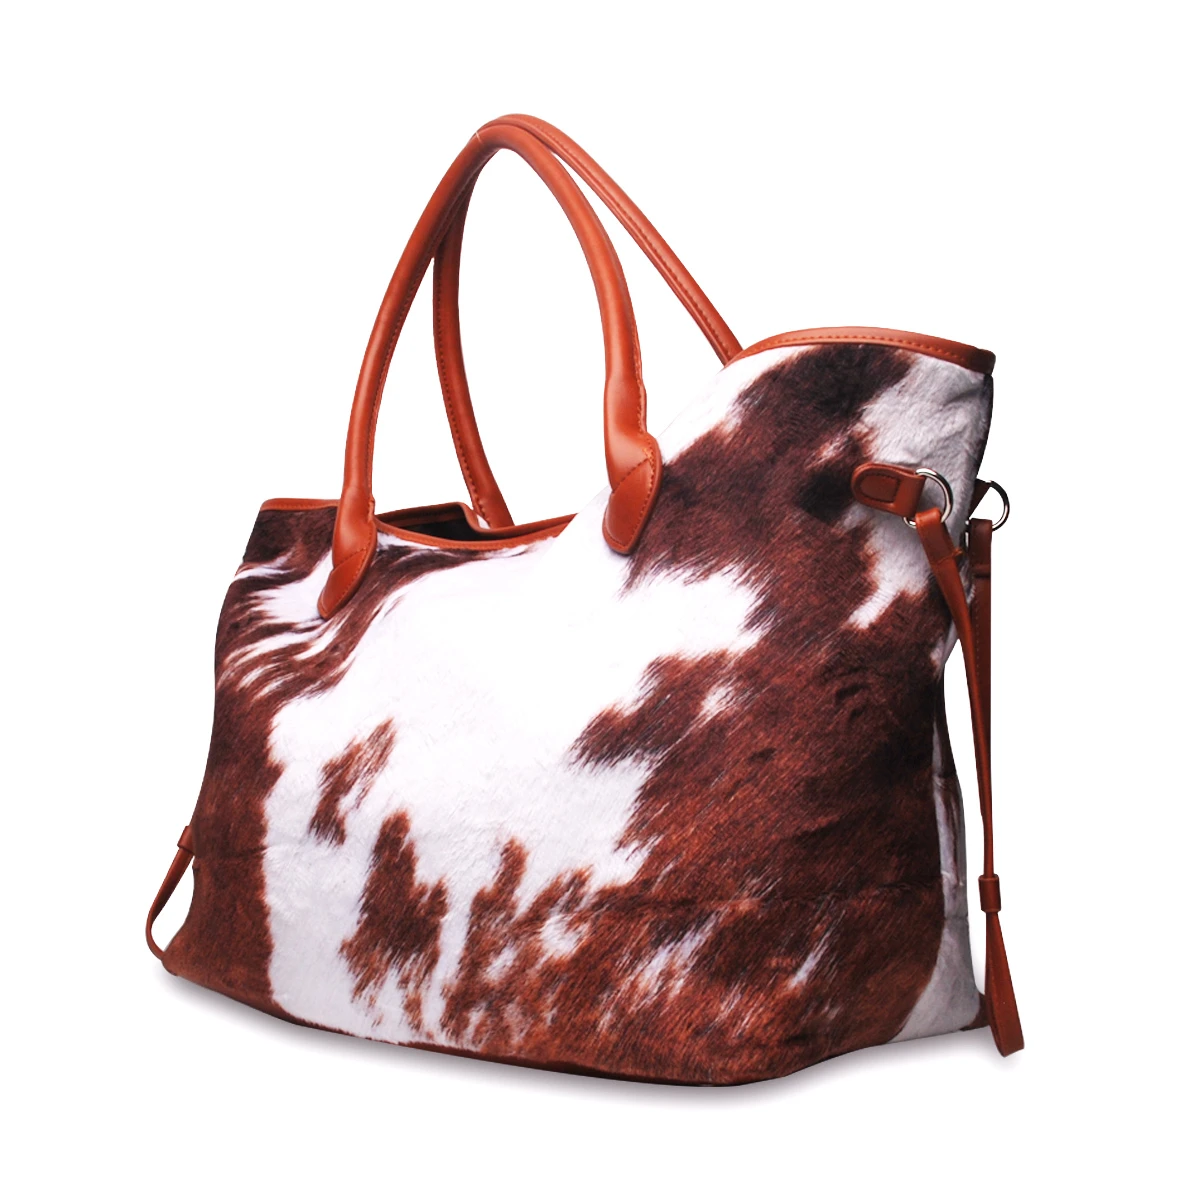 RTS Cow Print Suede Hair On Hide Tote Bag Leather Tote Bag Women Shoulder Bags Leather Handbag Totes DOM112-1431